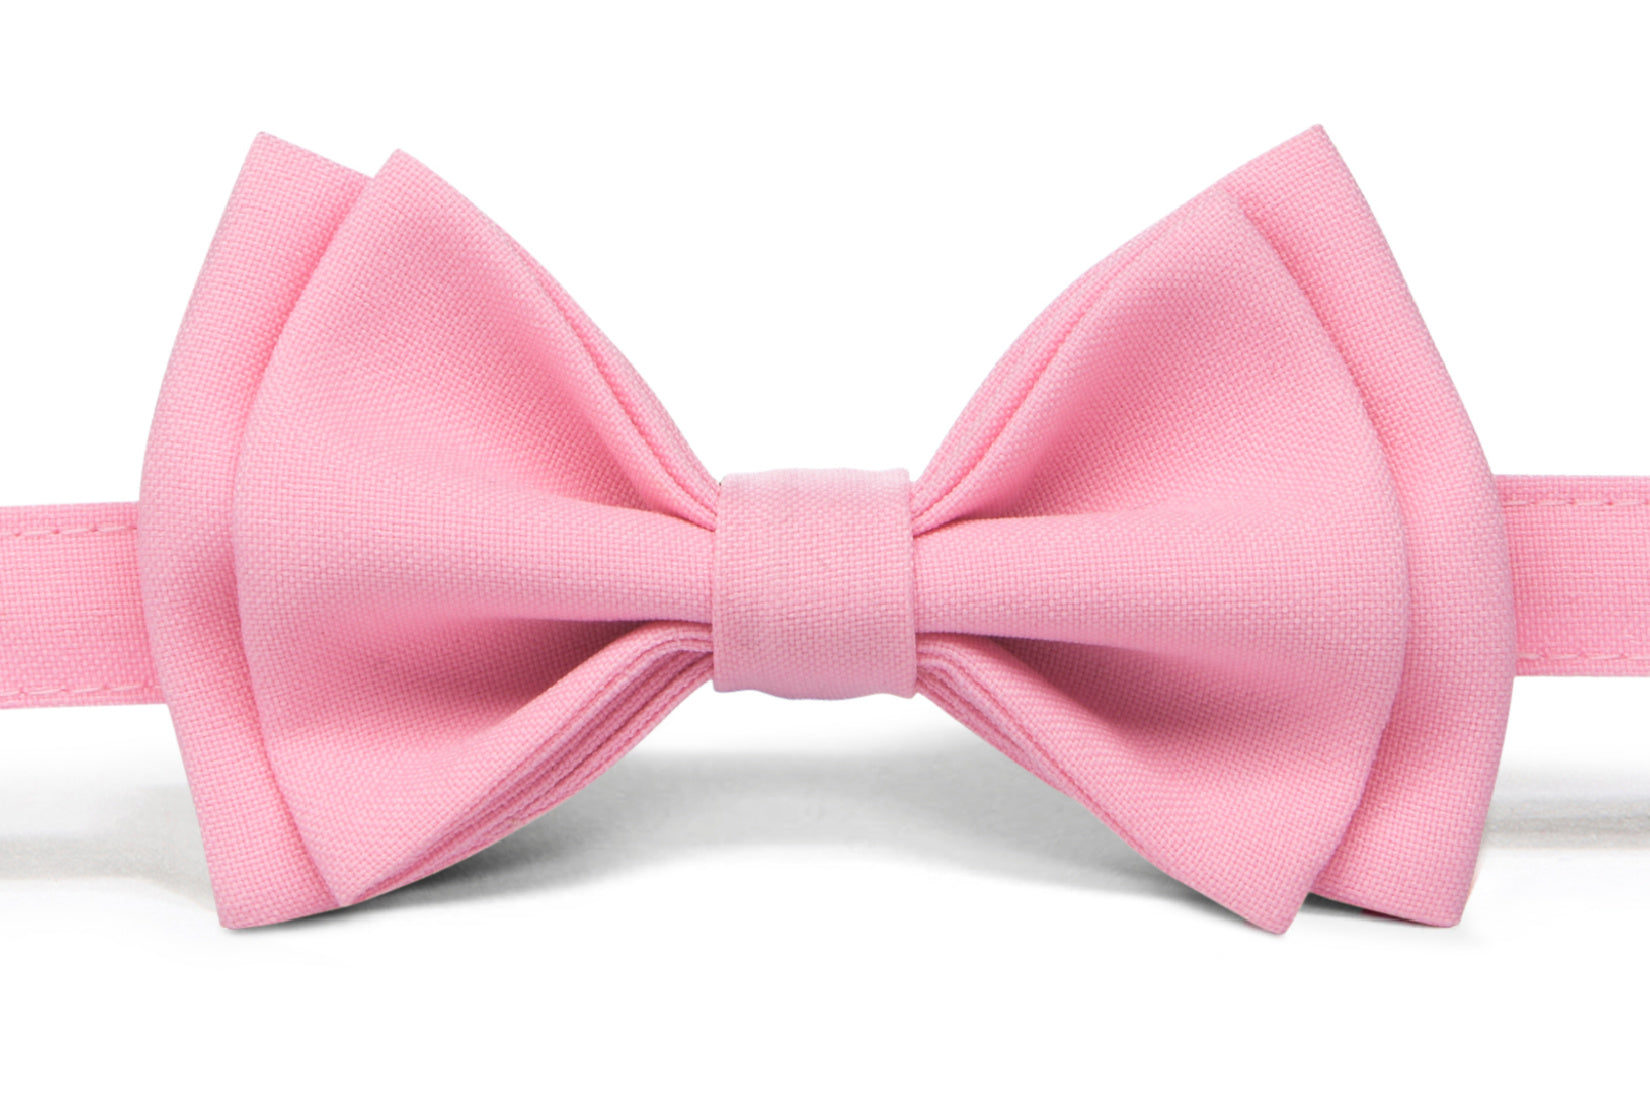 Beige Suspenders & Candy Pink Bow Tie - Baby to Adult Sizes– Armoniia